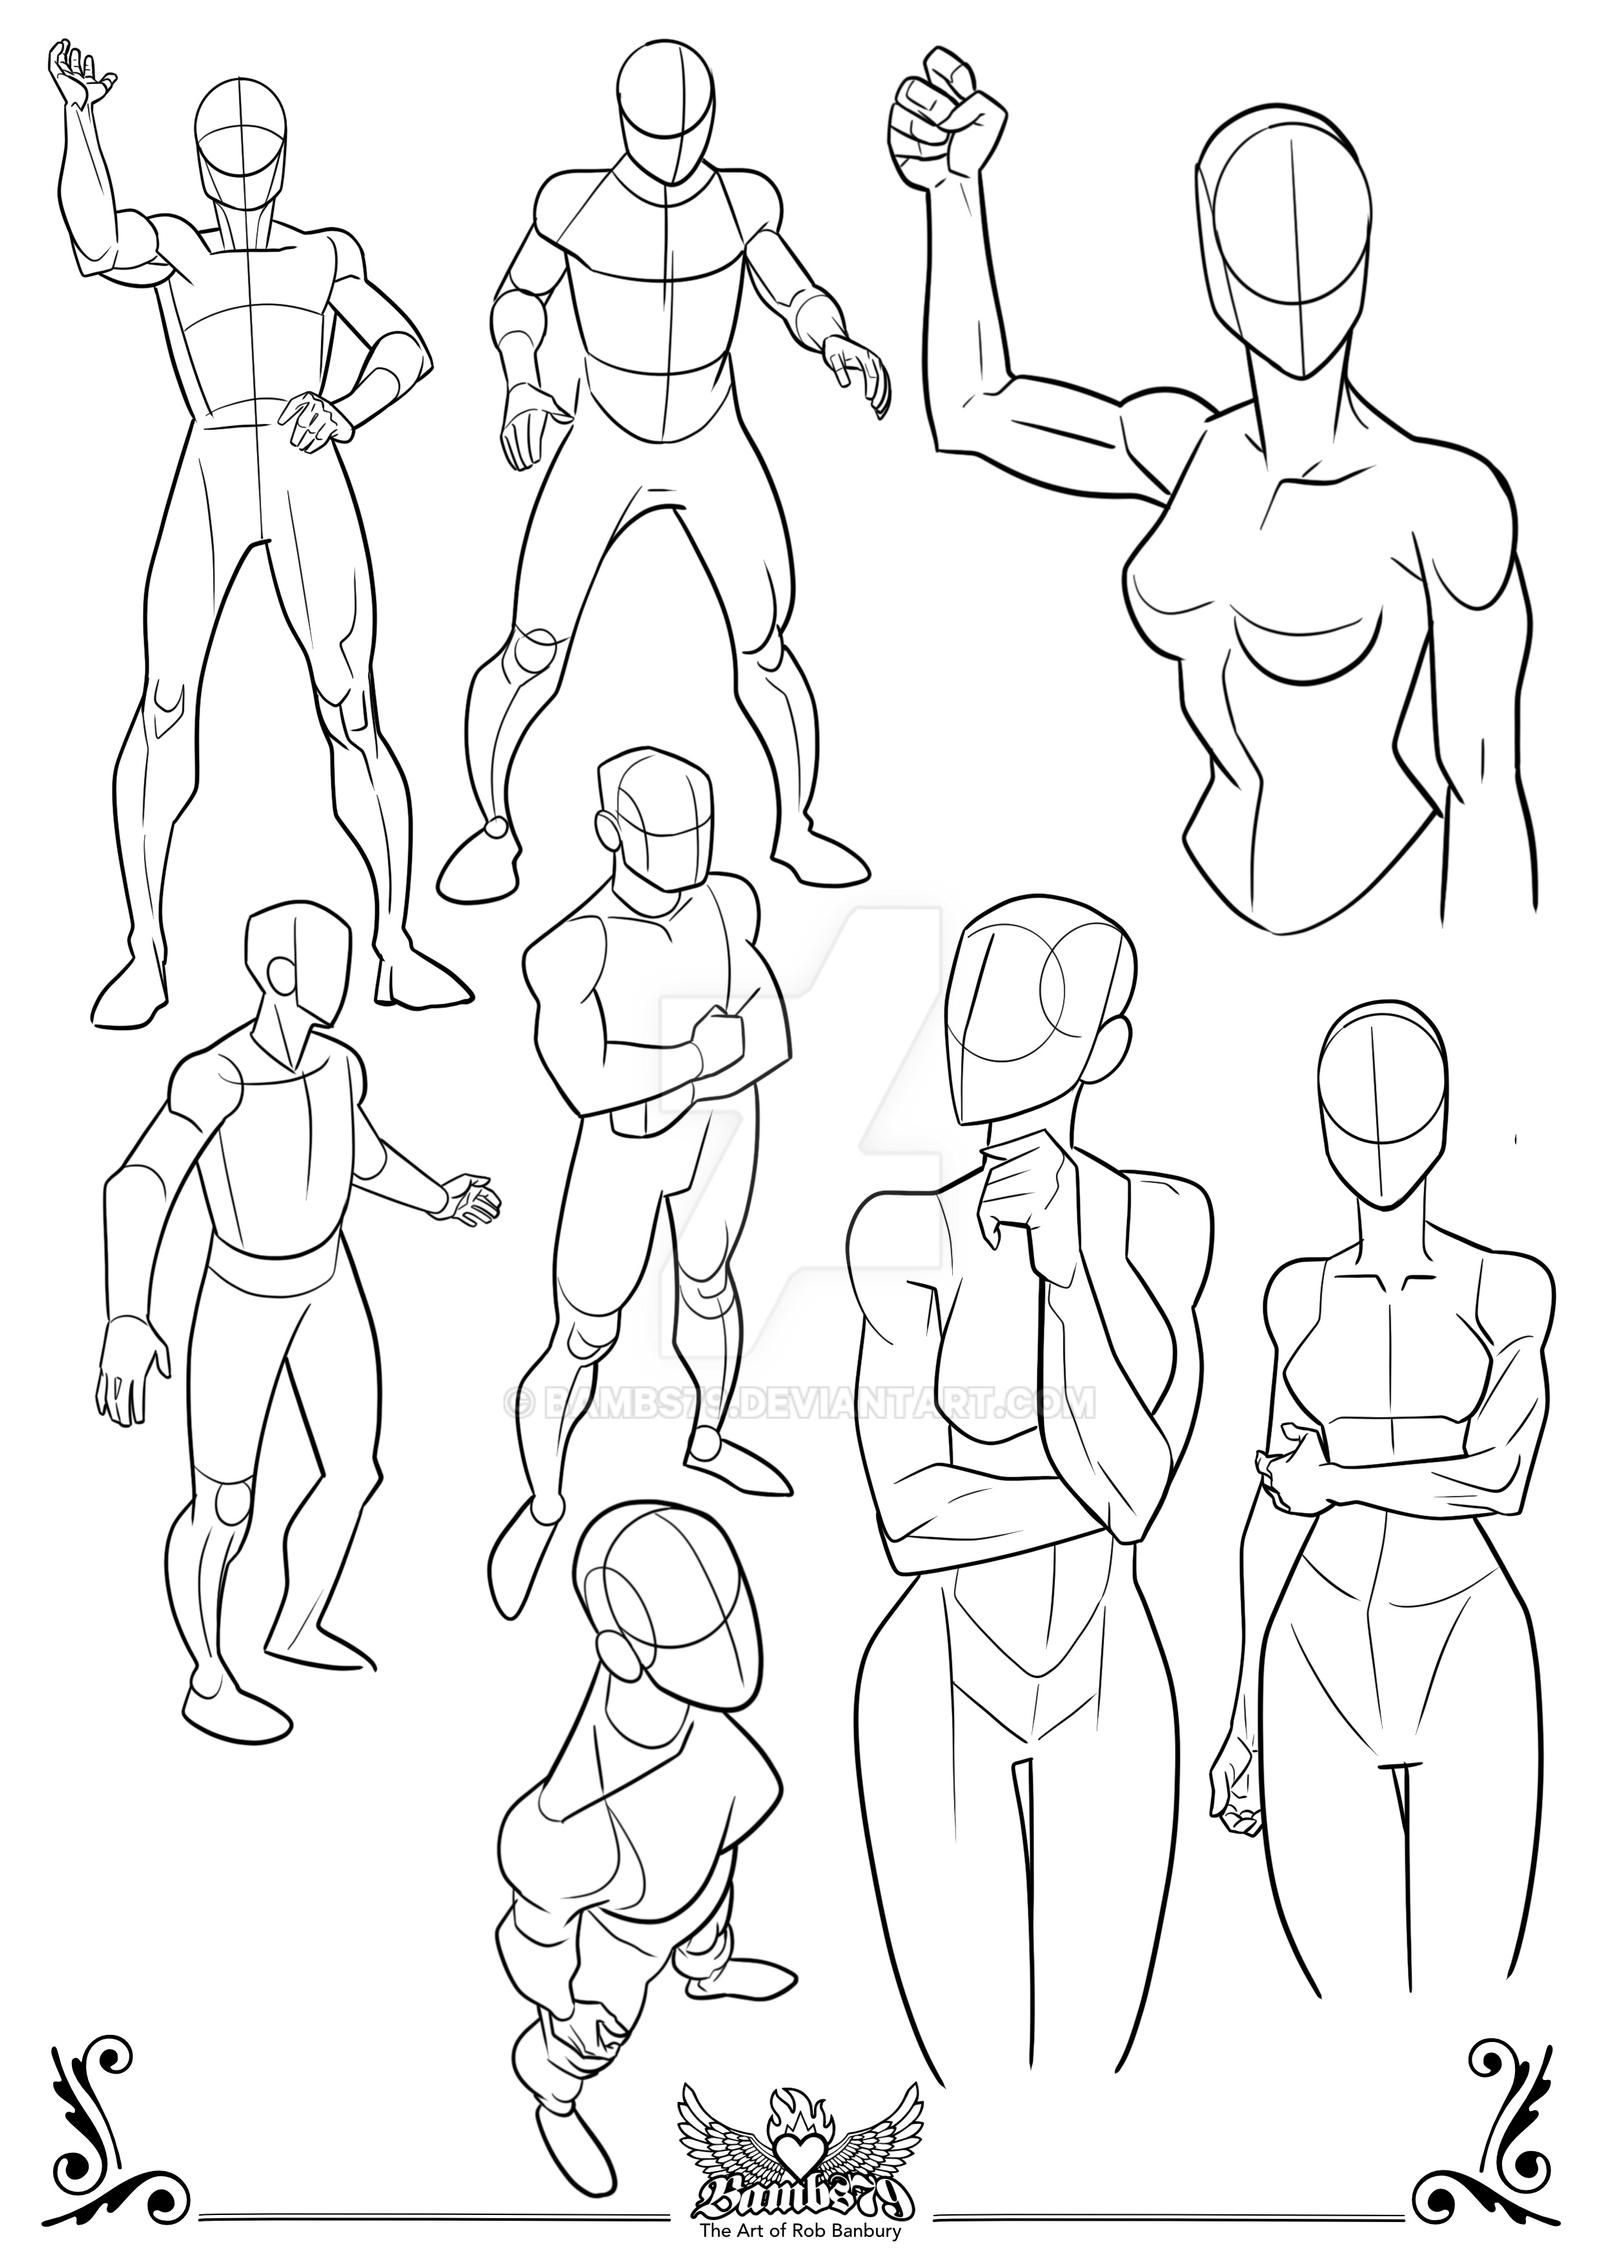 Female and male body reference sheet. - Drawing Art Skills